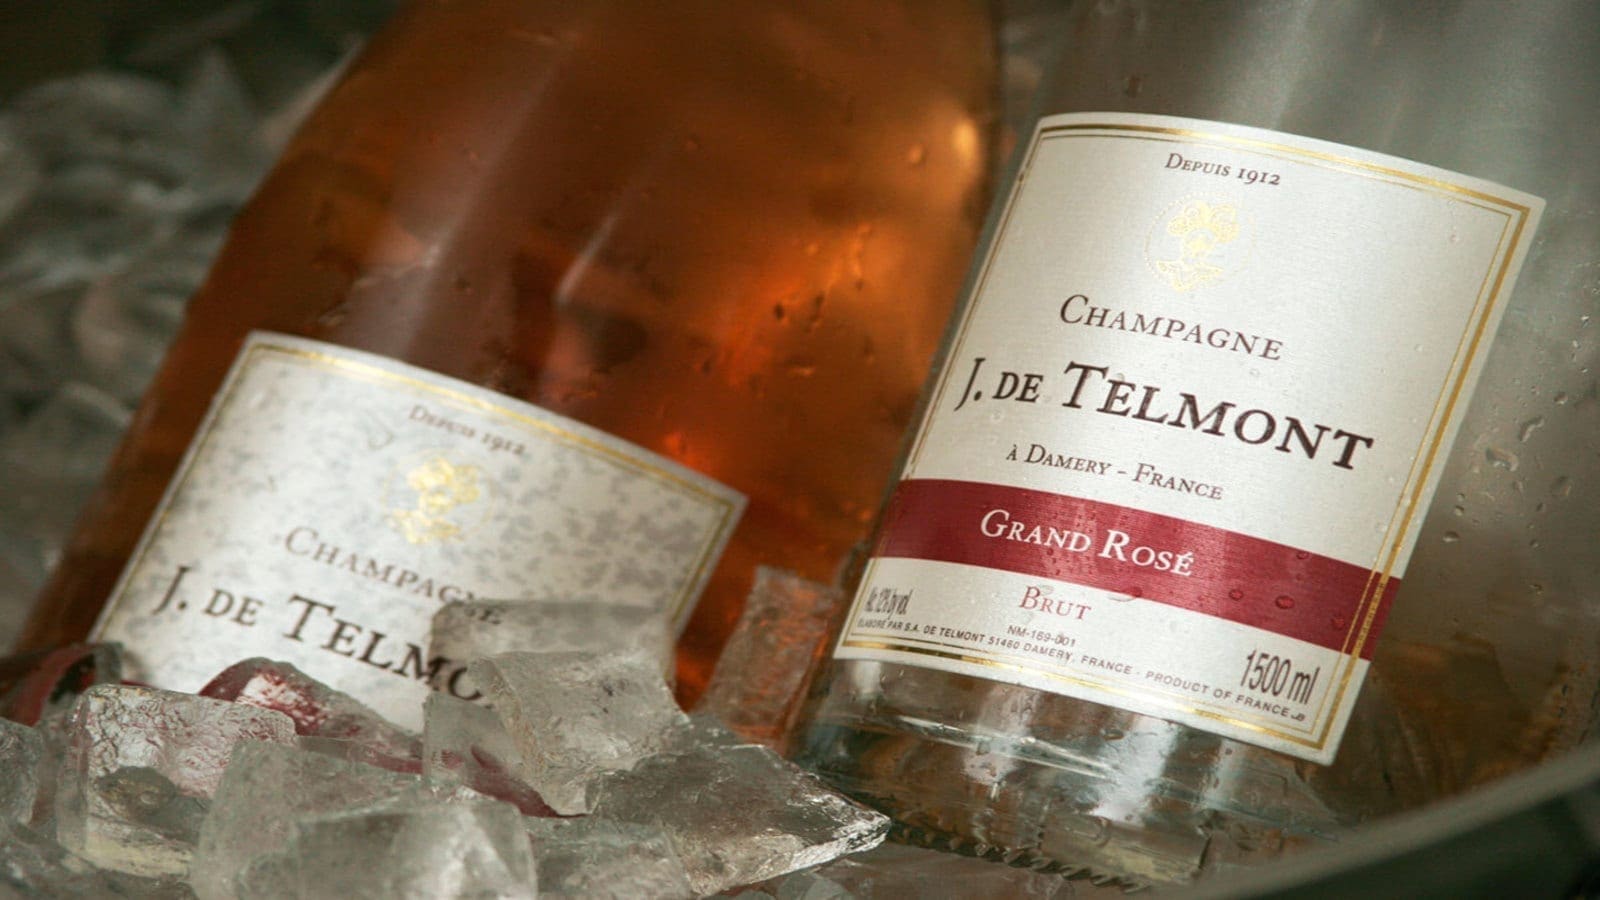 Rémy Cointreau acquires controlling stake of champagne producer, Champagne J de Telmont